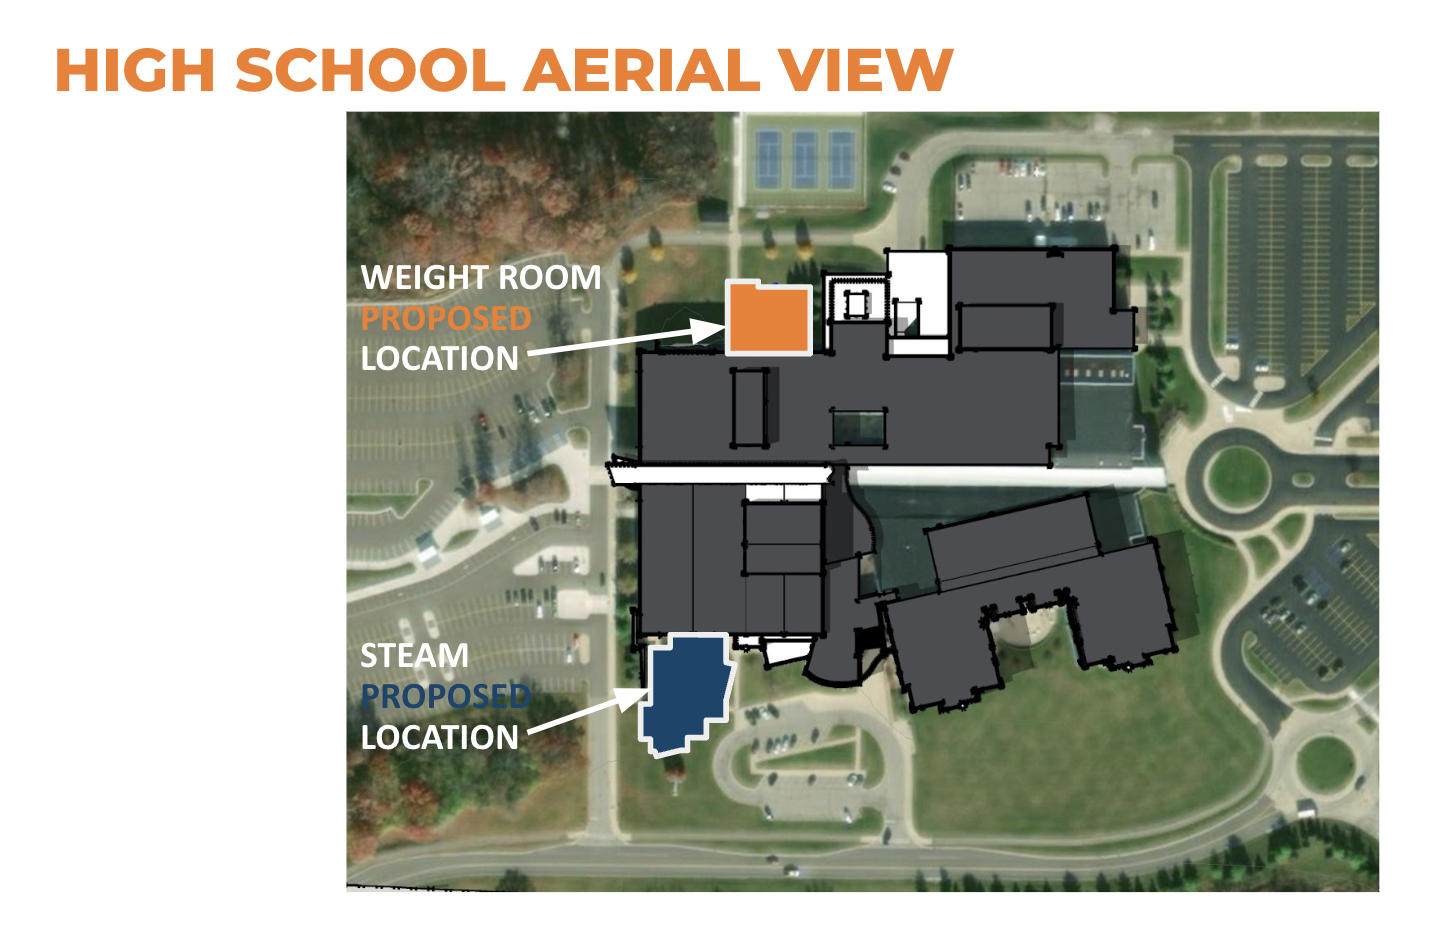 High School Aerial View - Proposed